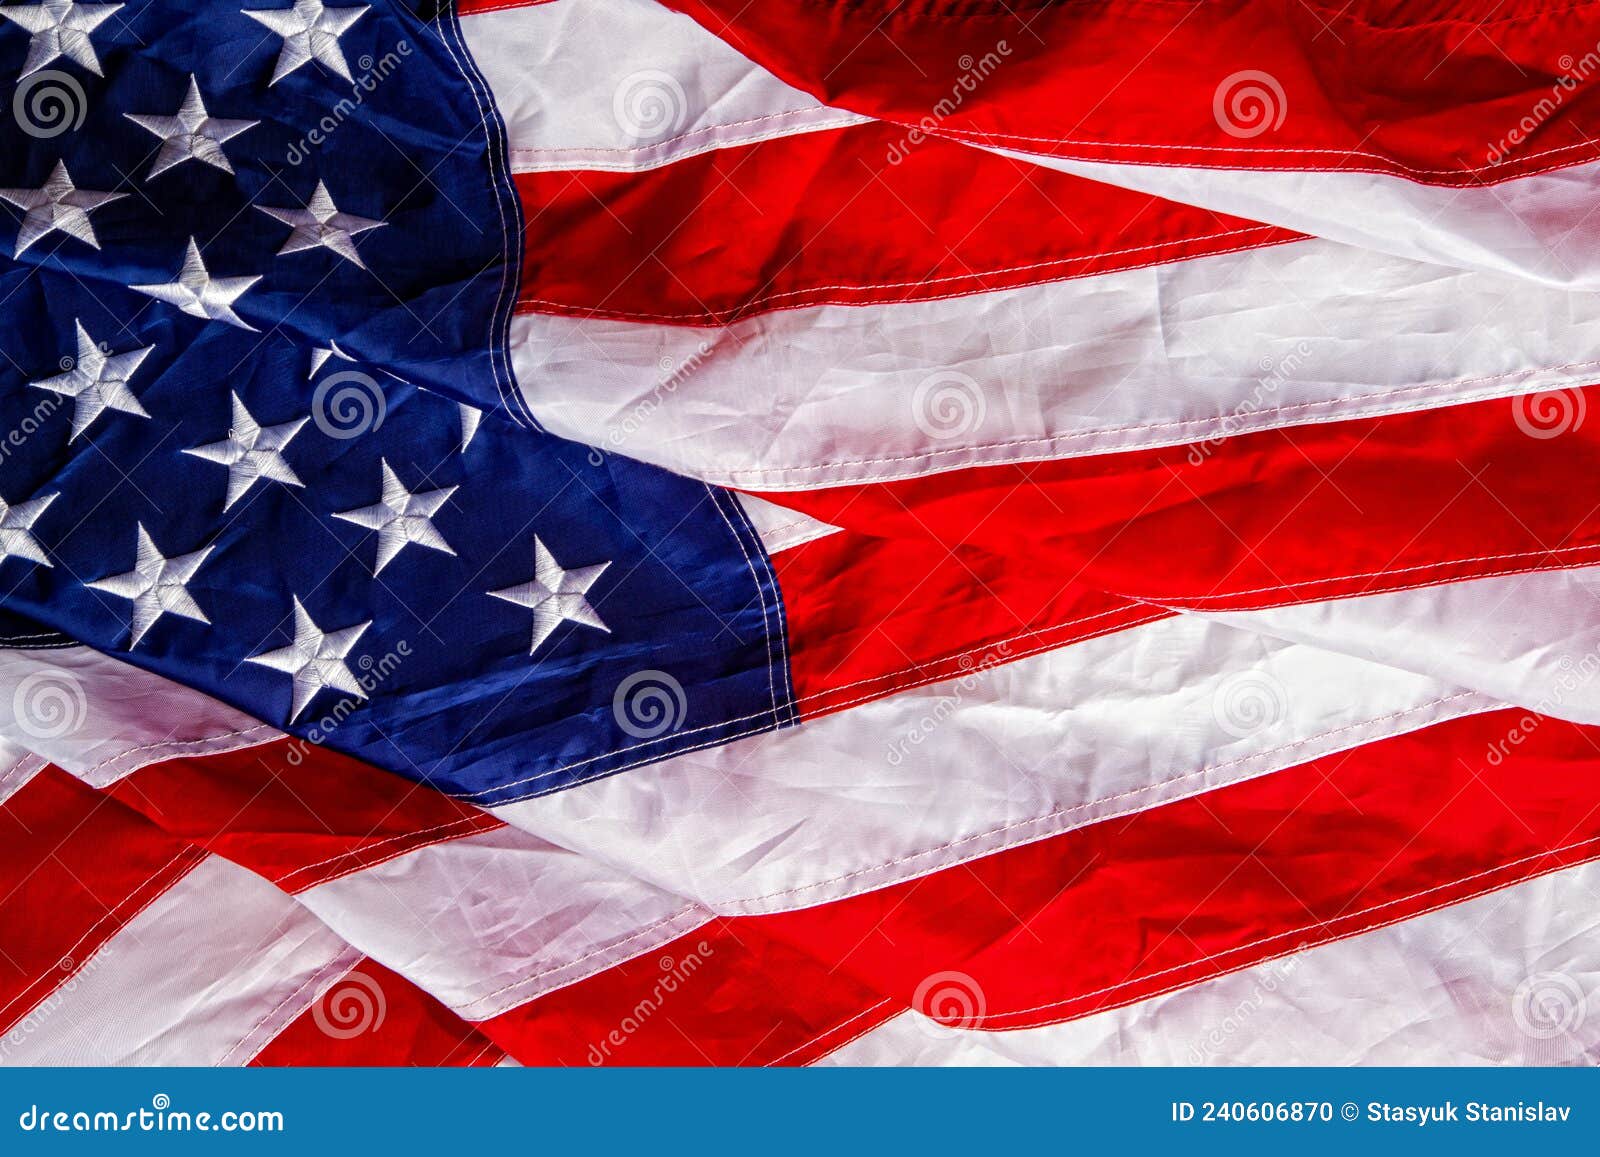 Beautiful Star Striped Flag Waving The State Symbol The United States